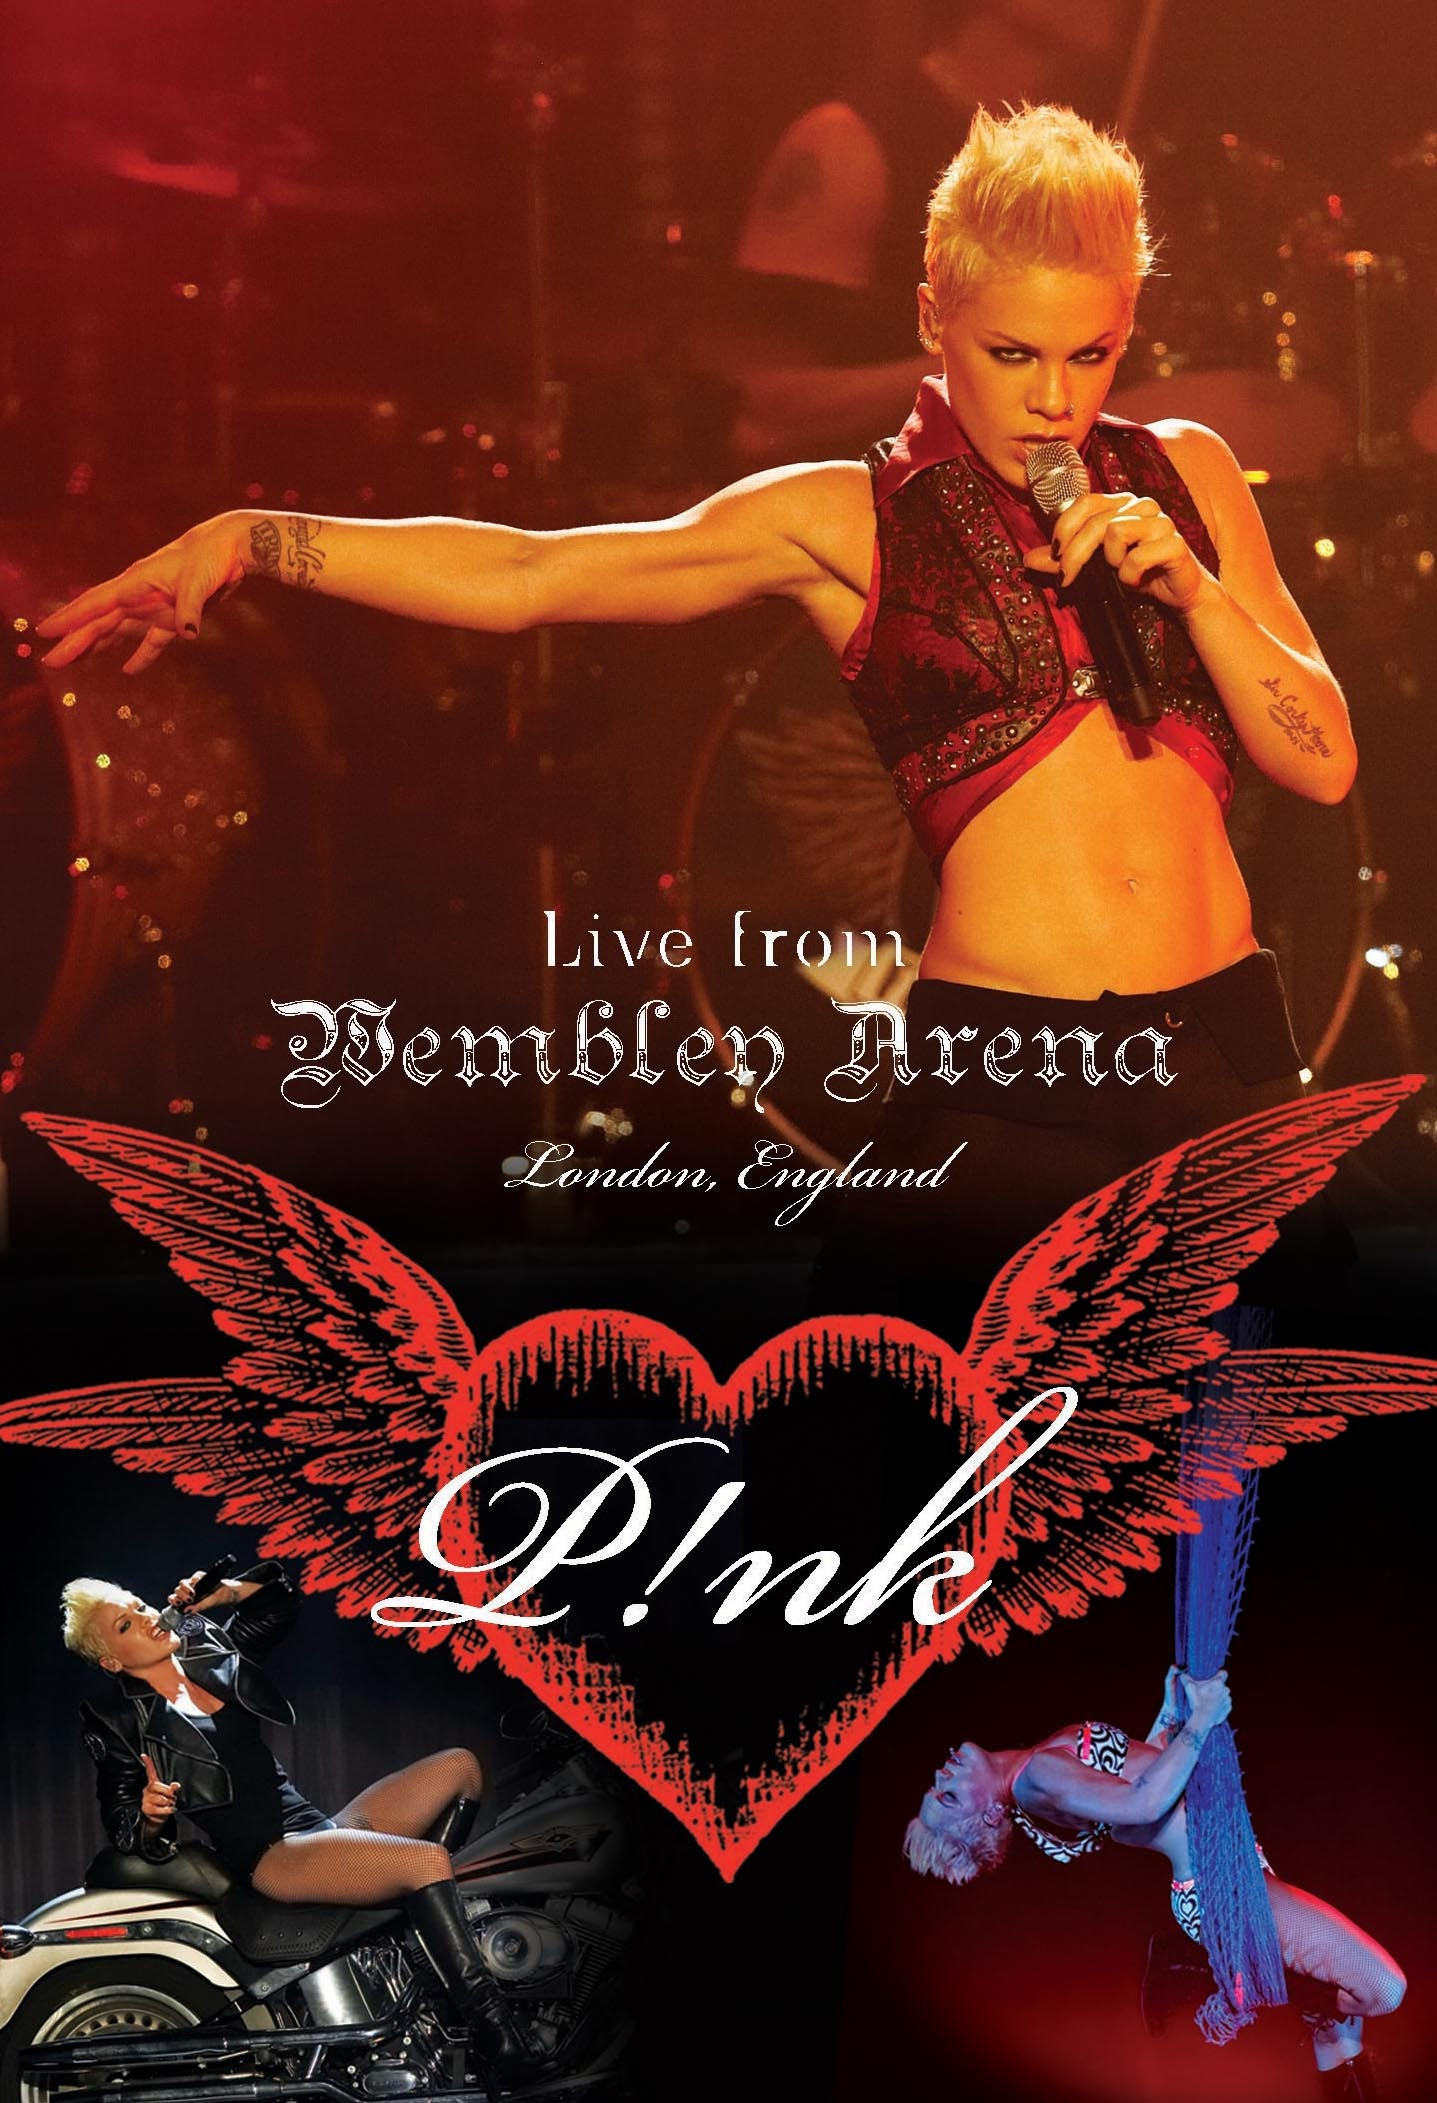 Live from Wembley Arena, London, England | P!nk Wiki | Fandom